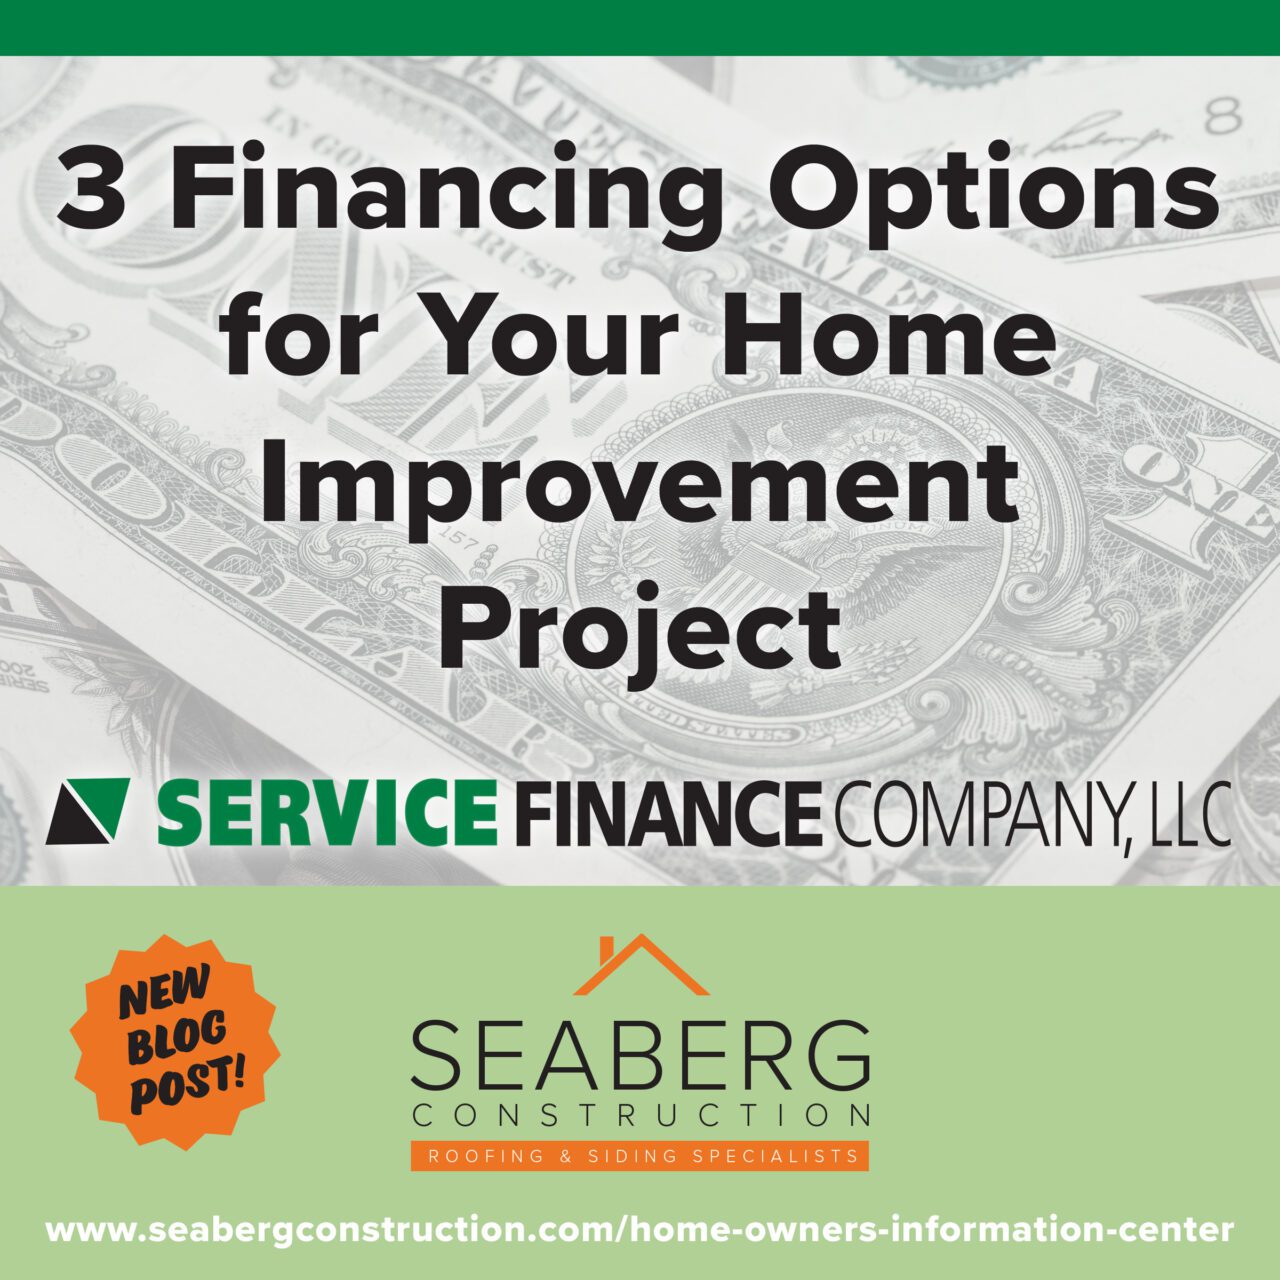 Seaberg Construction Blog: Finance Options for Your Home Improvement Project